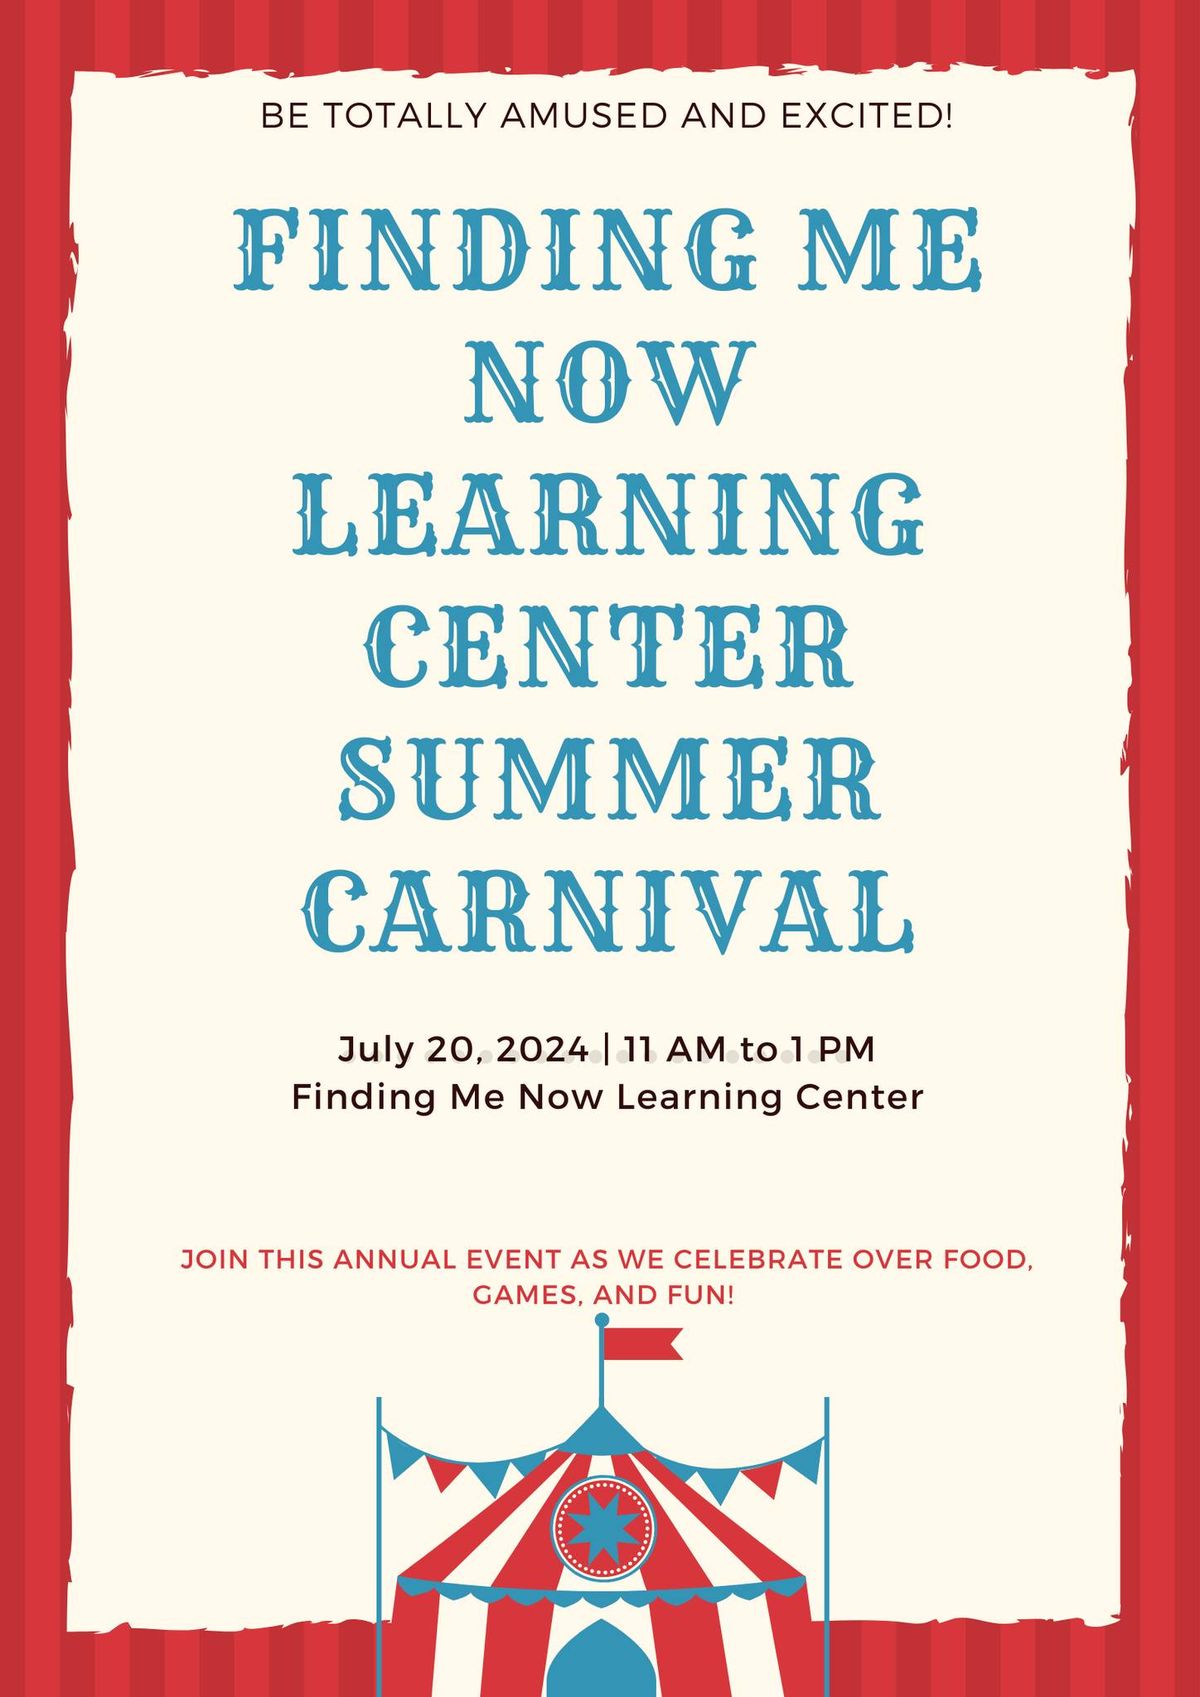 Finding Me Now Learning Center Summer Carnival